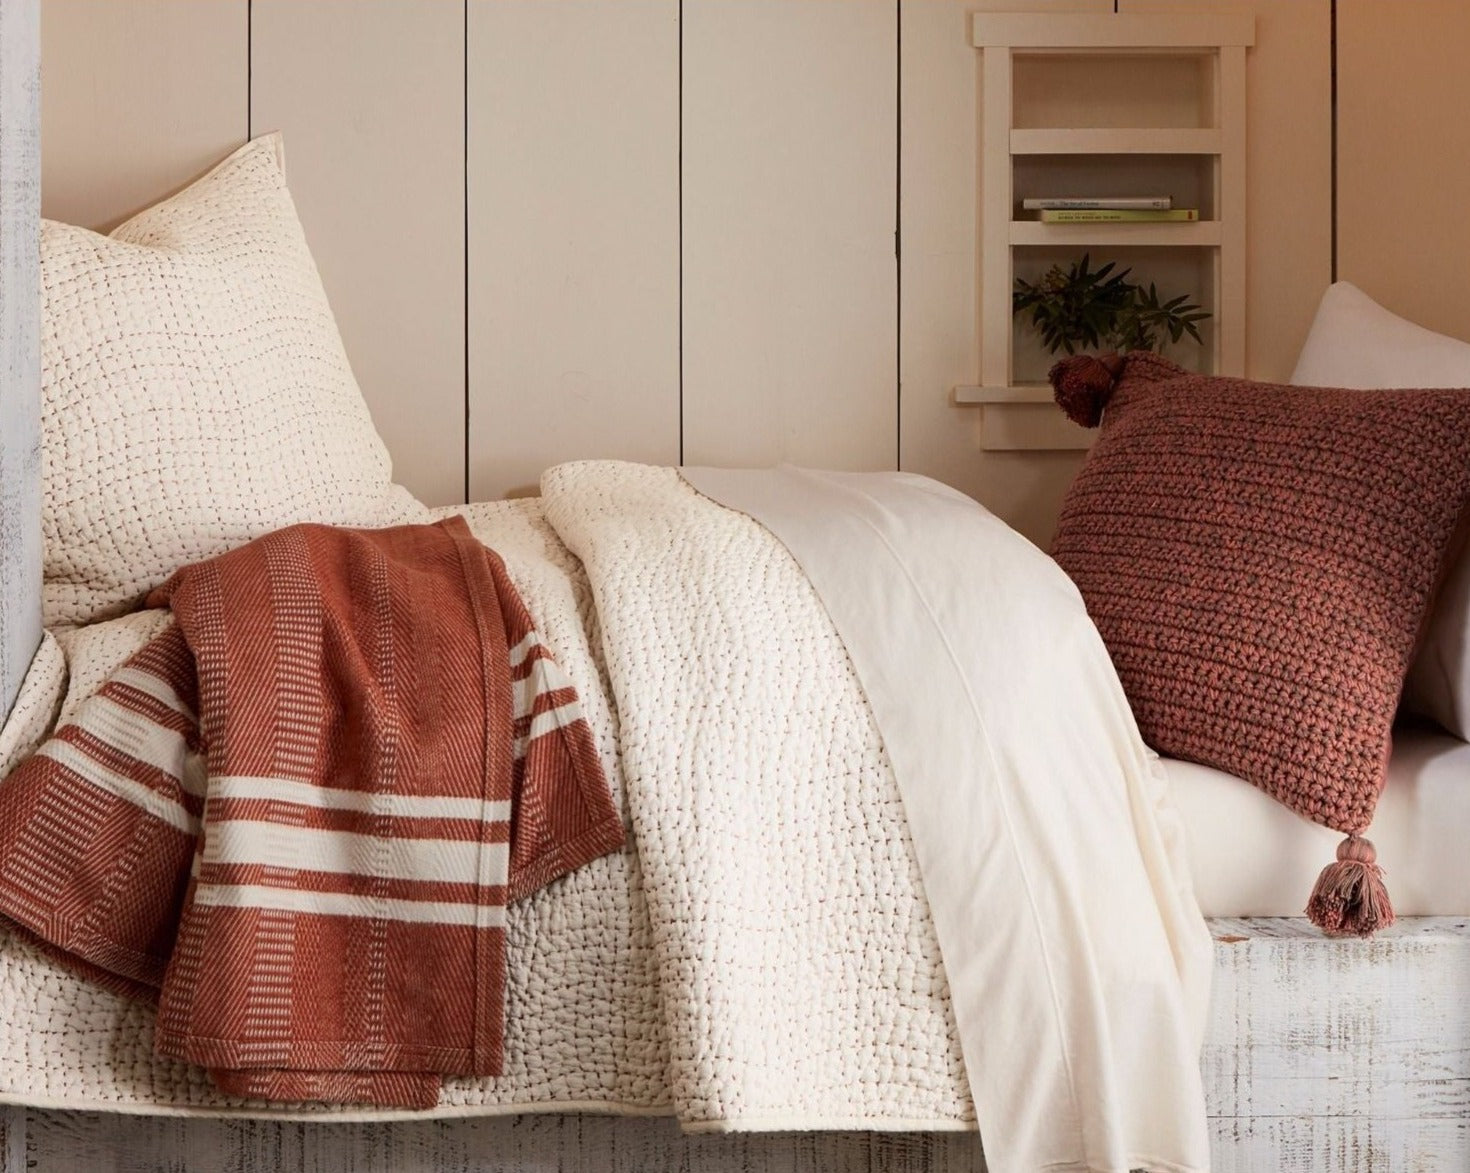 Luxury Organic Quilts from Resthouse, British Columbia, Canada